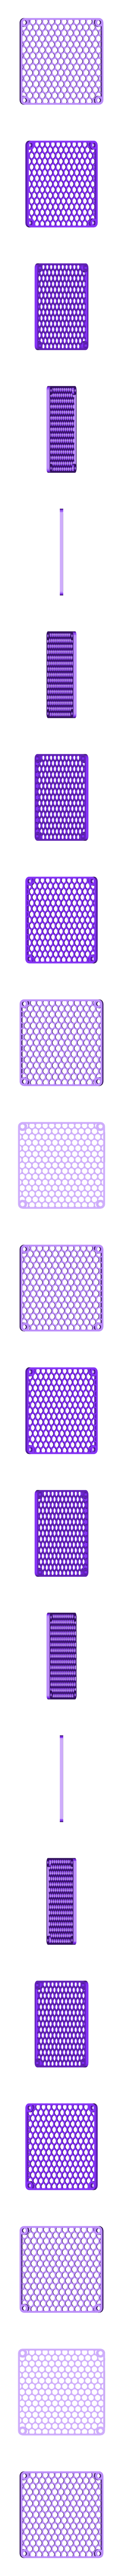 92mm_dot_reduced_fan_cover.stl Download free STL file Customizable Fan Grill Cover • 3D print design, MightyNozzle